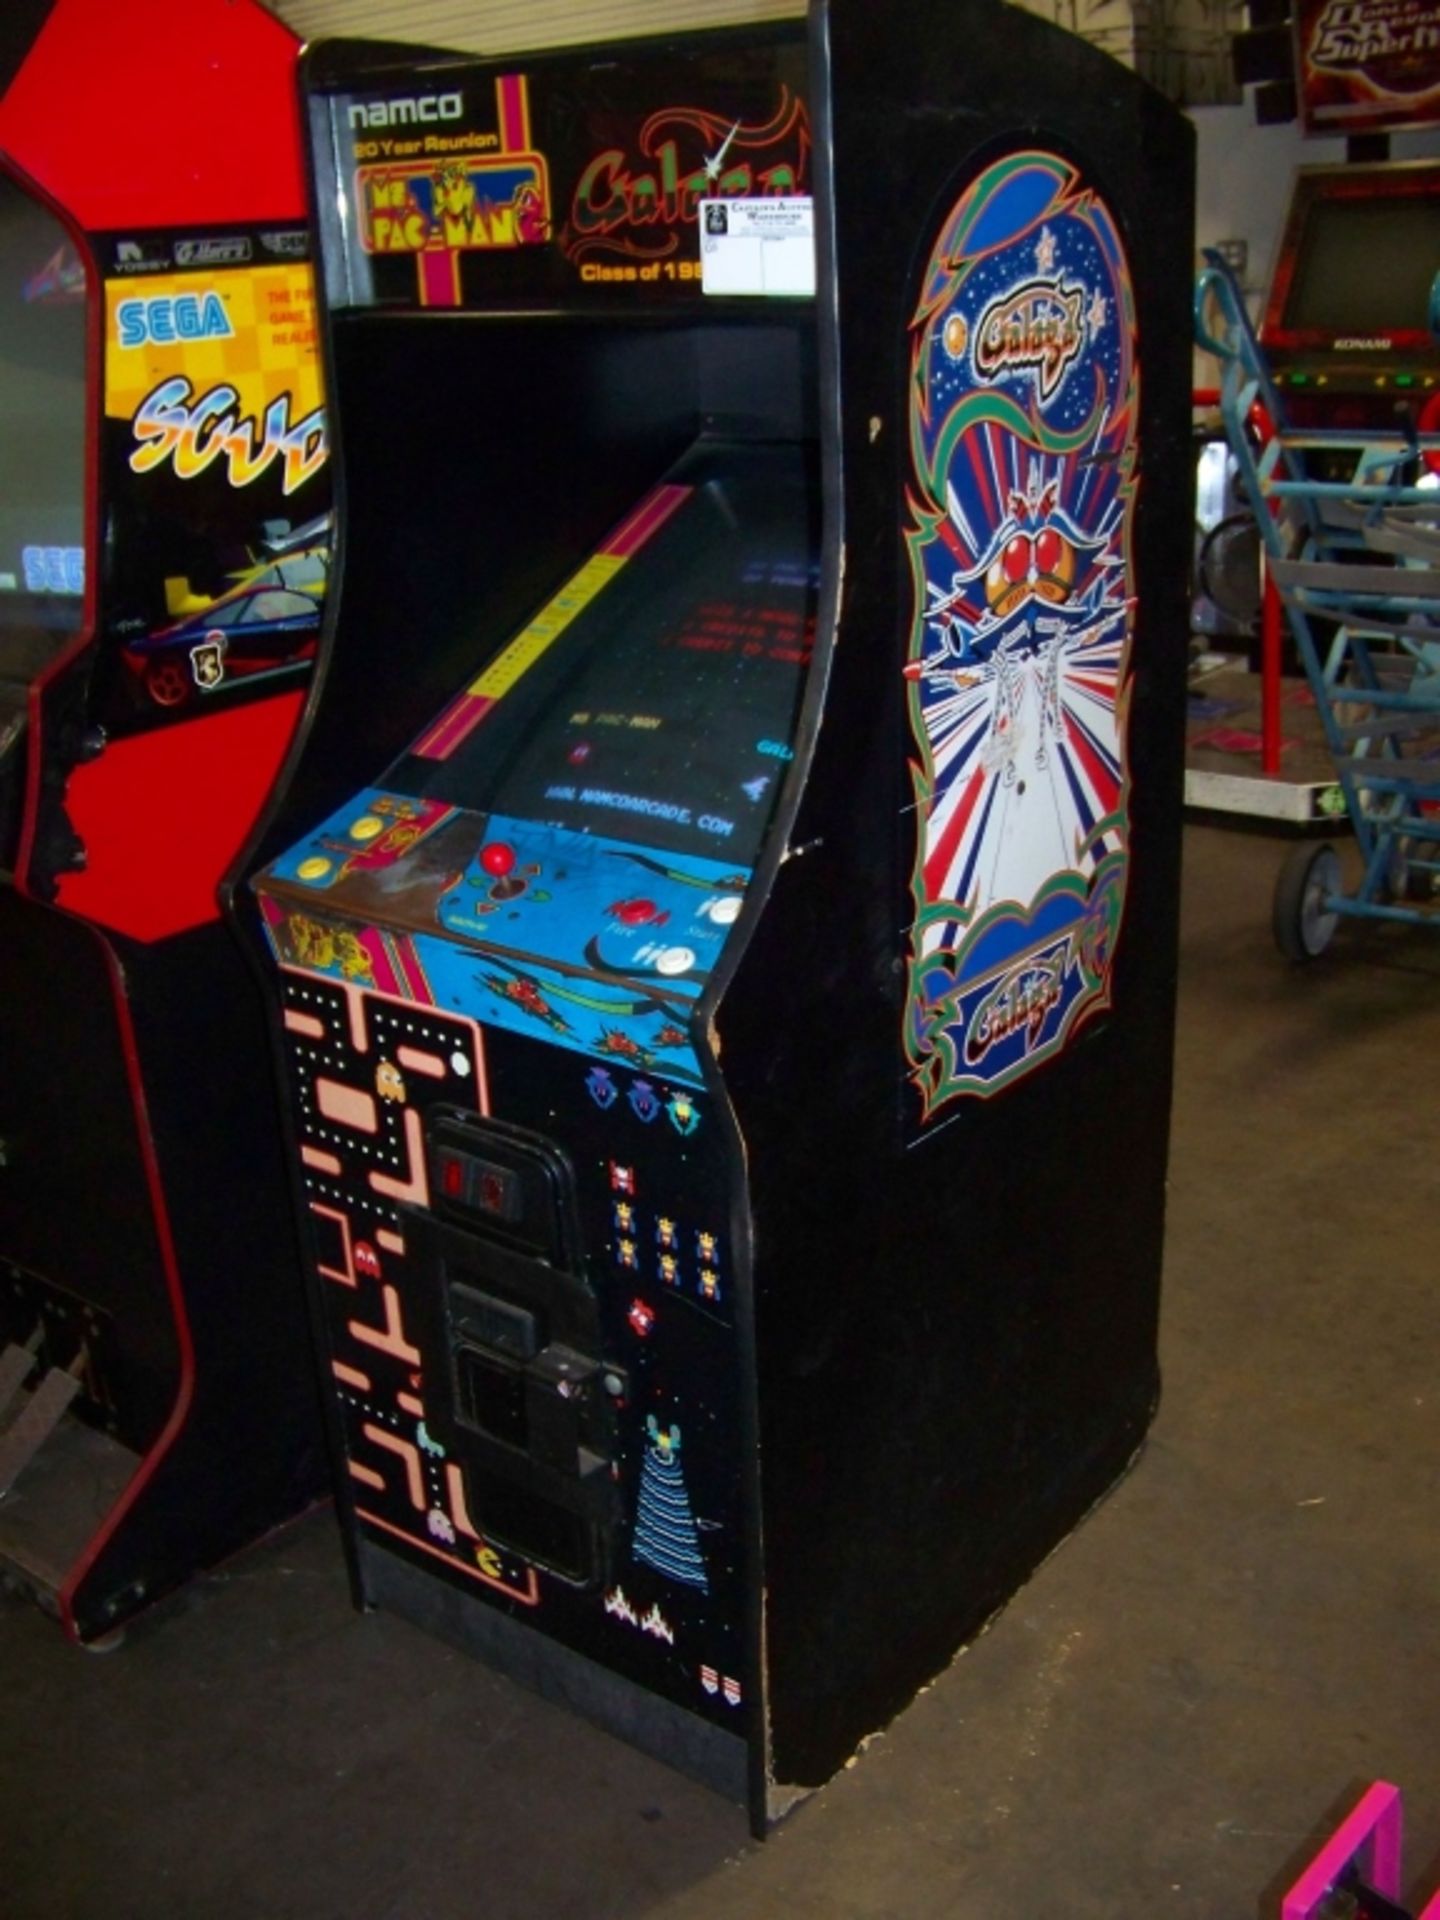 MS PACMAN GALAGA CLASS OF 1981 ARCADE GAME - Image 6 of 6